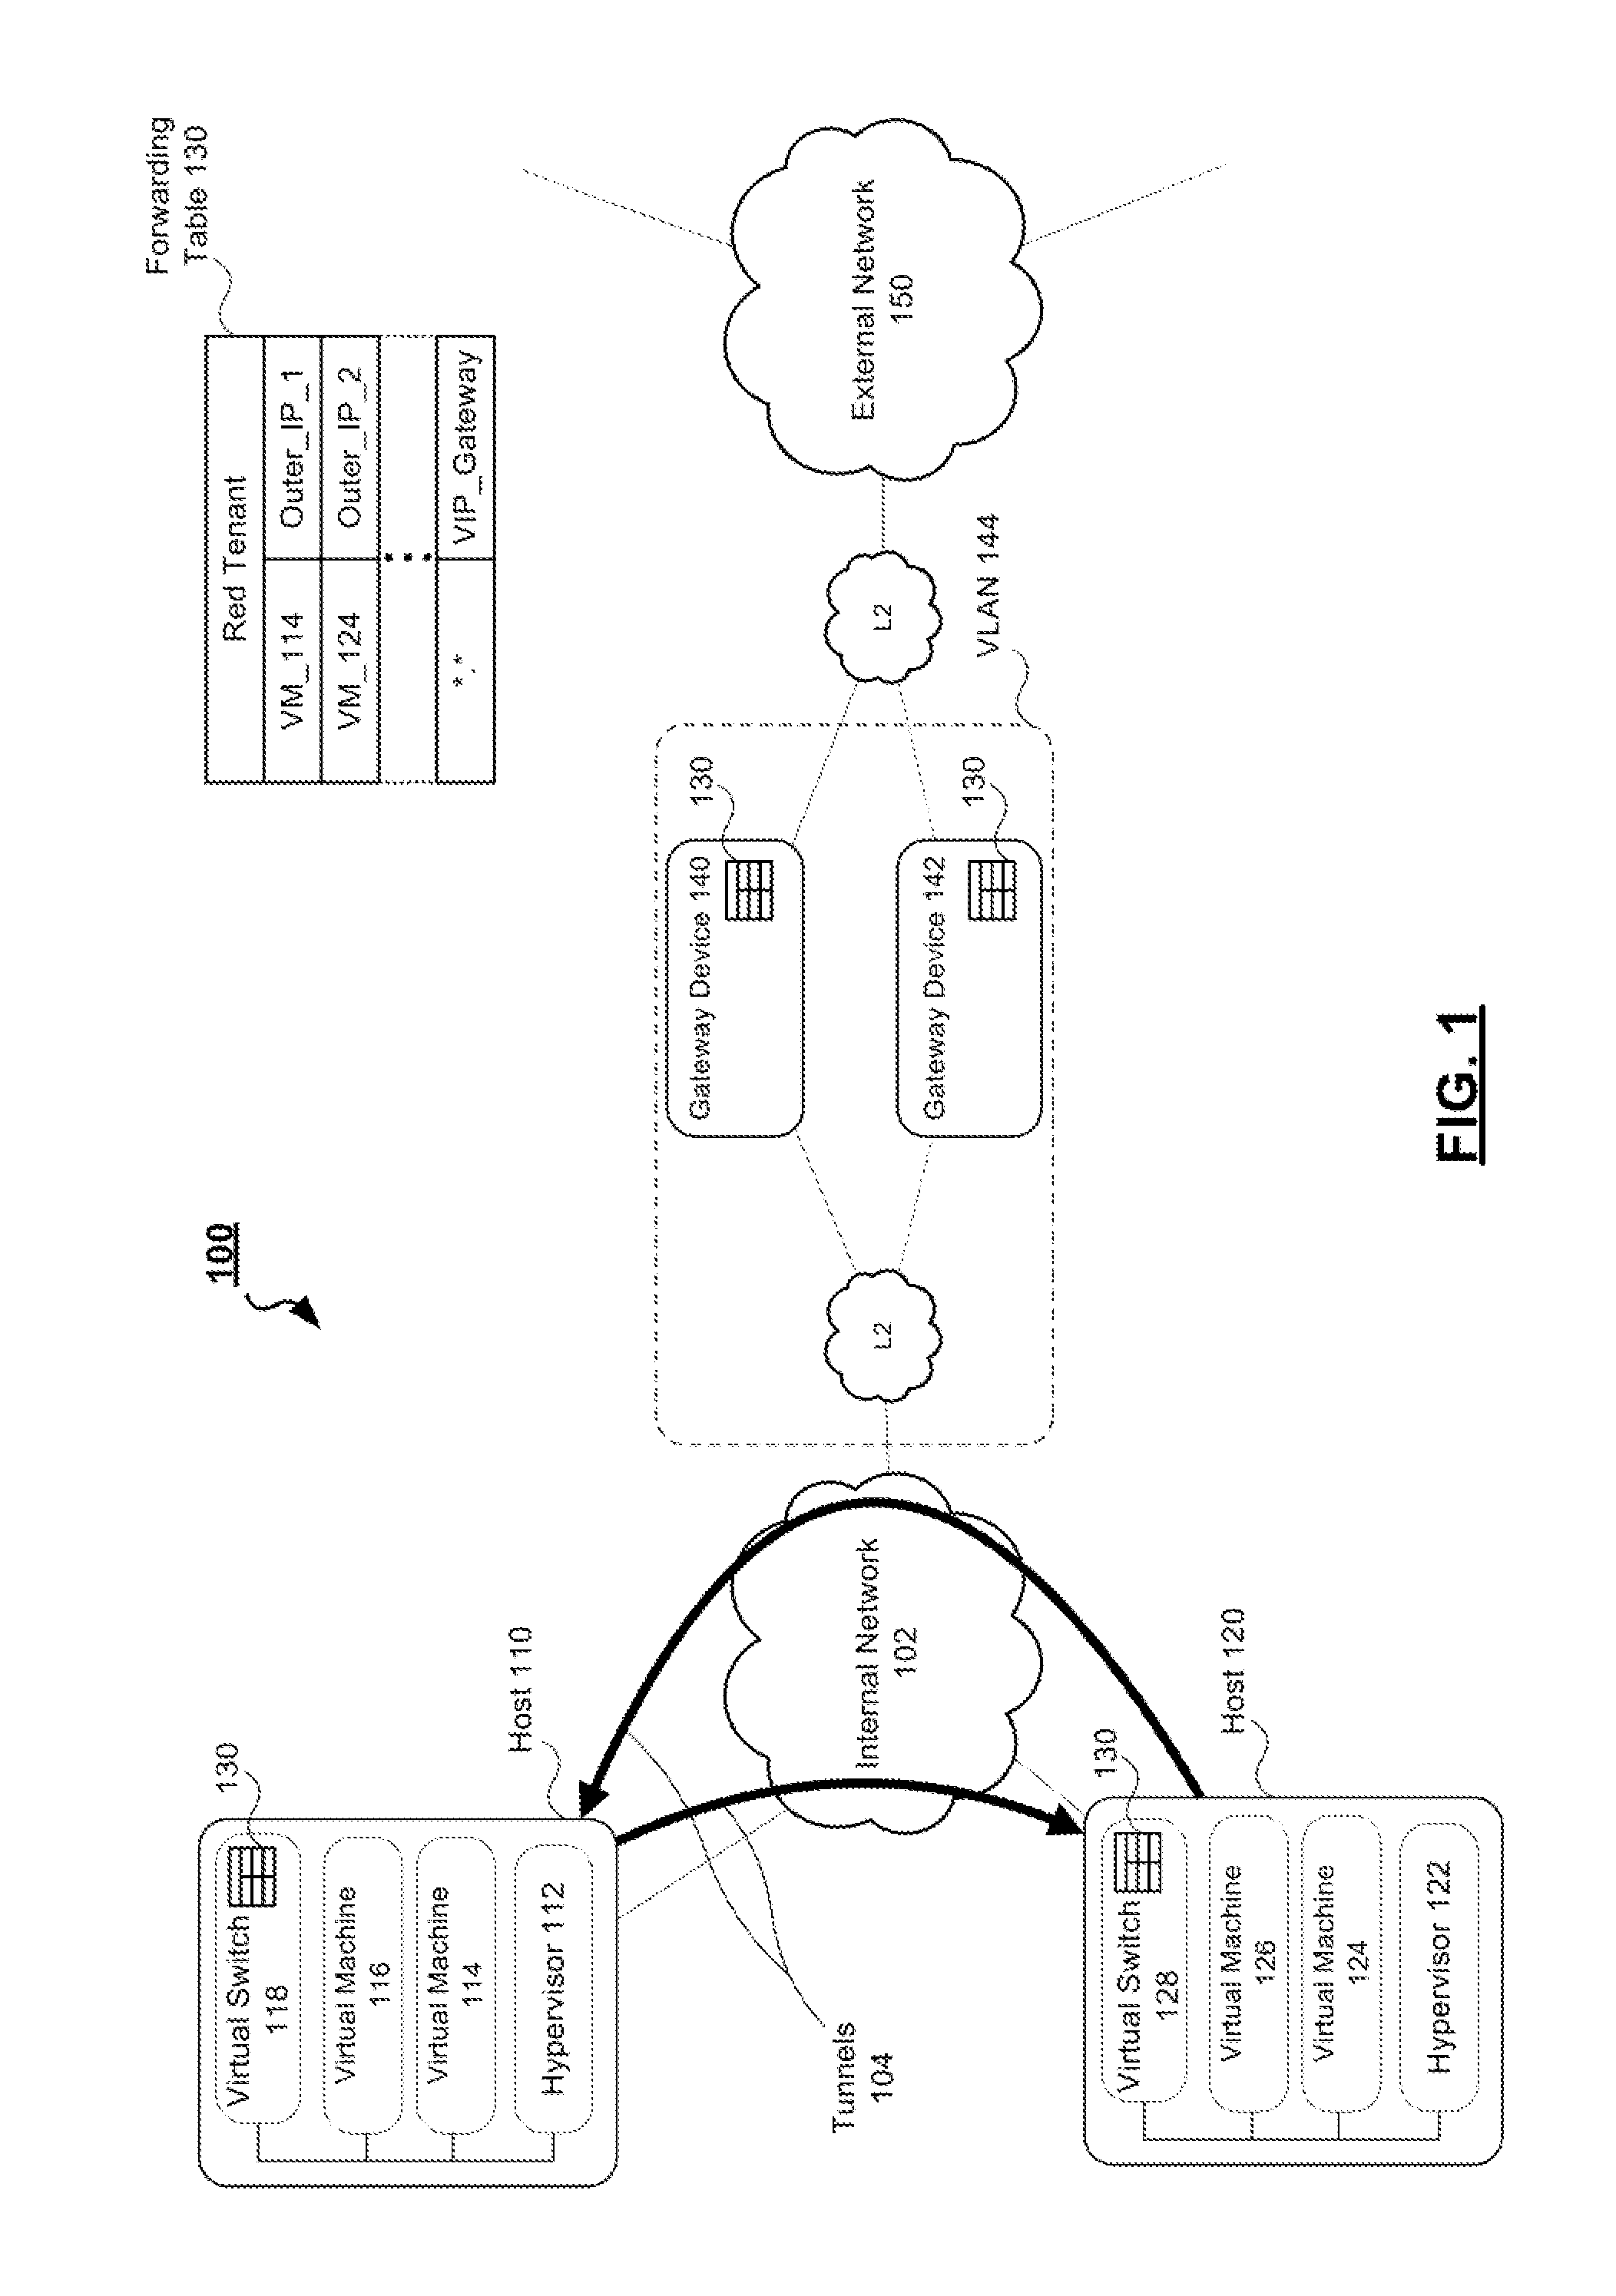 Systems and methods for providing vlan-independent gateways in a network virtualization overlay implementation